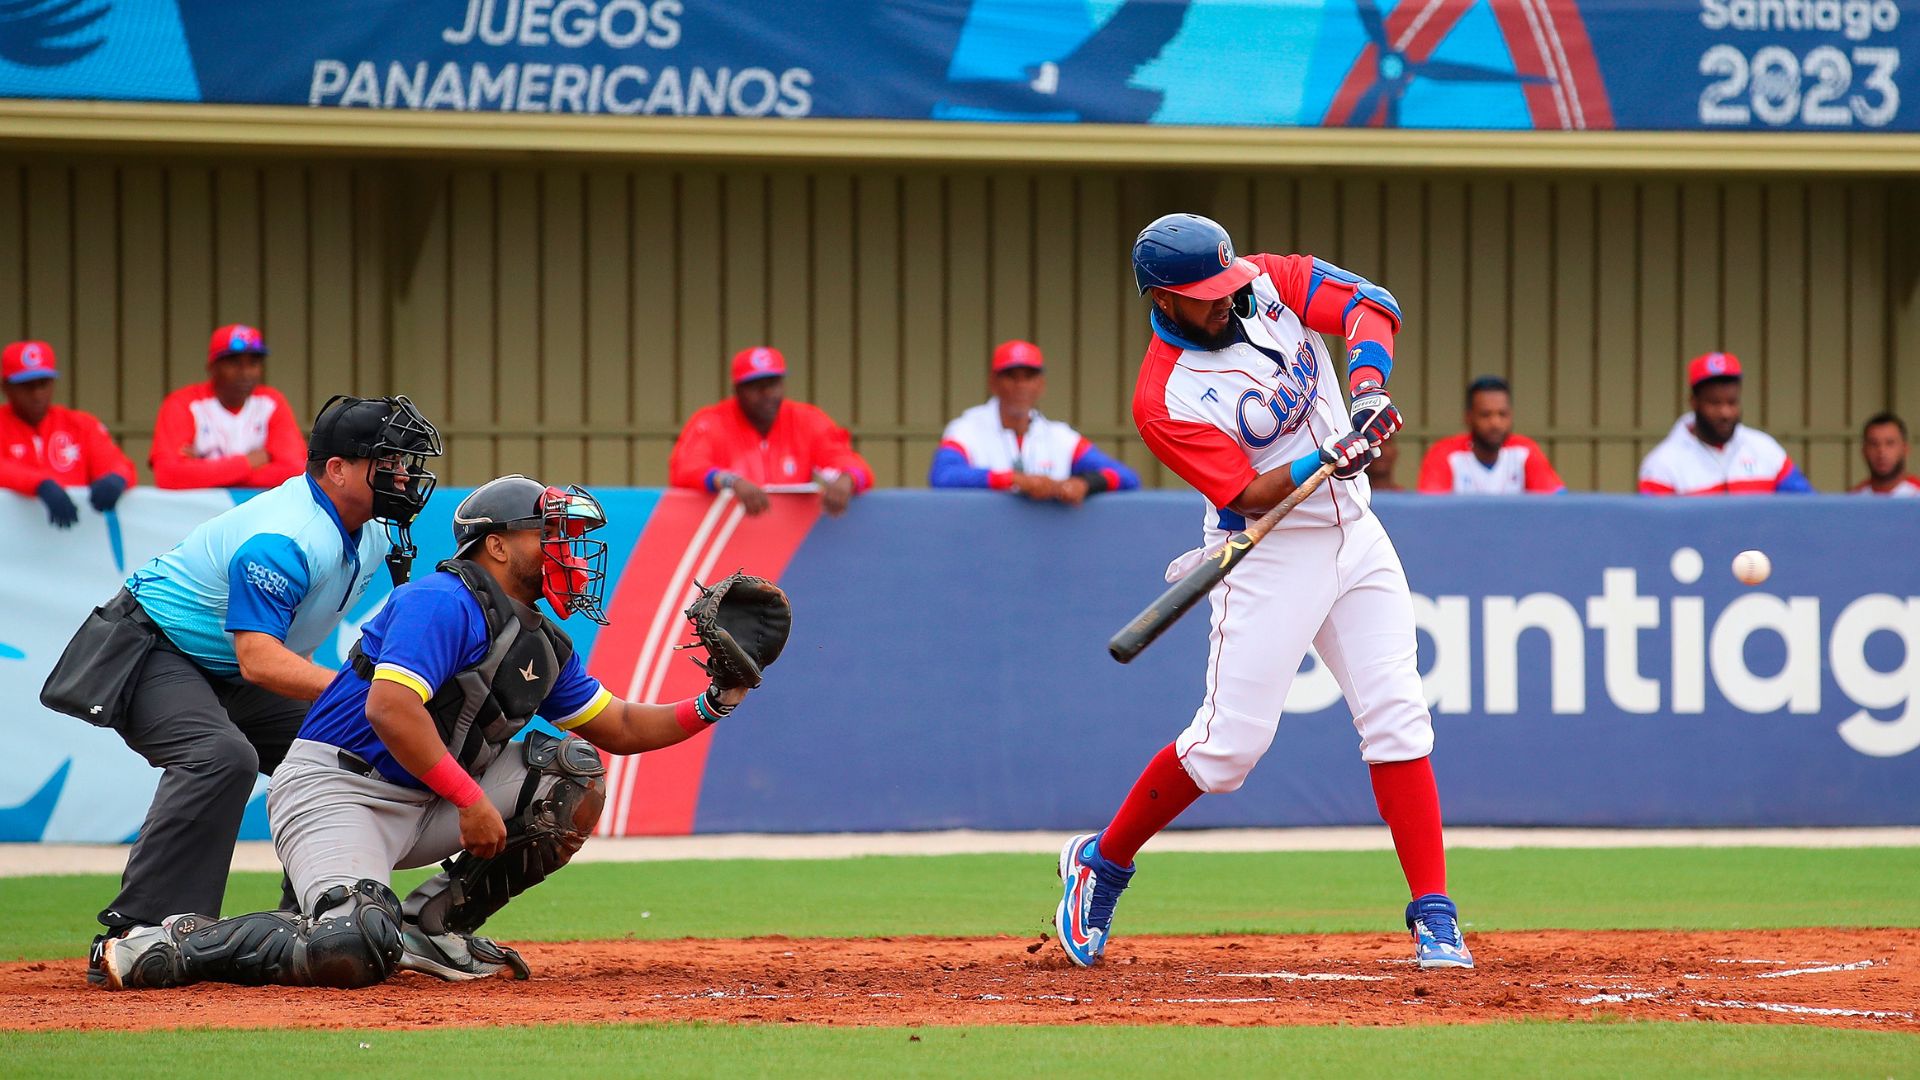 Cuba's narrow victory over Colombia closed the first day of baseball